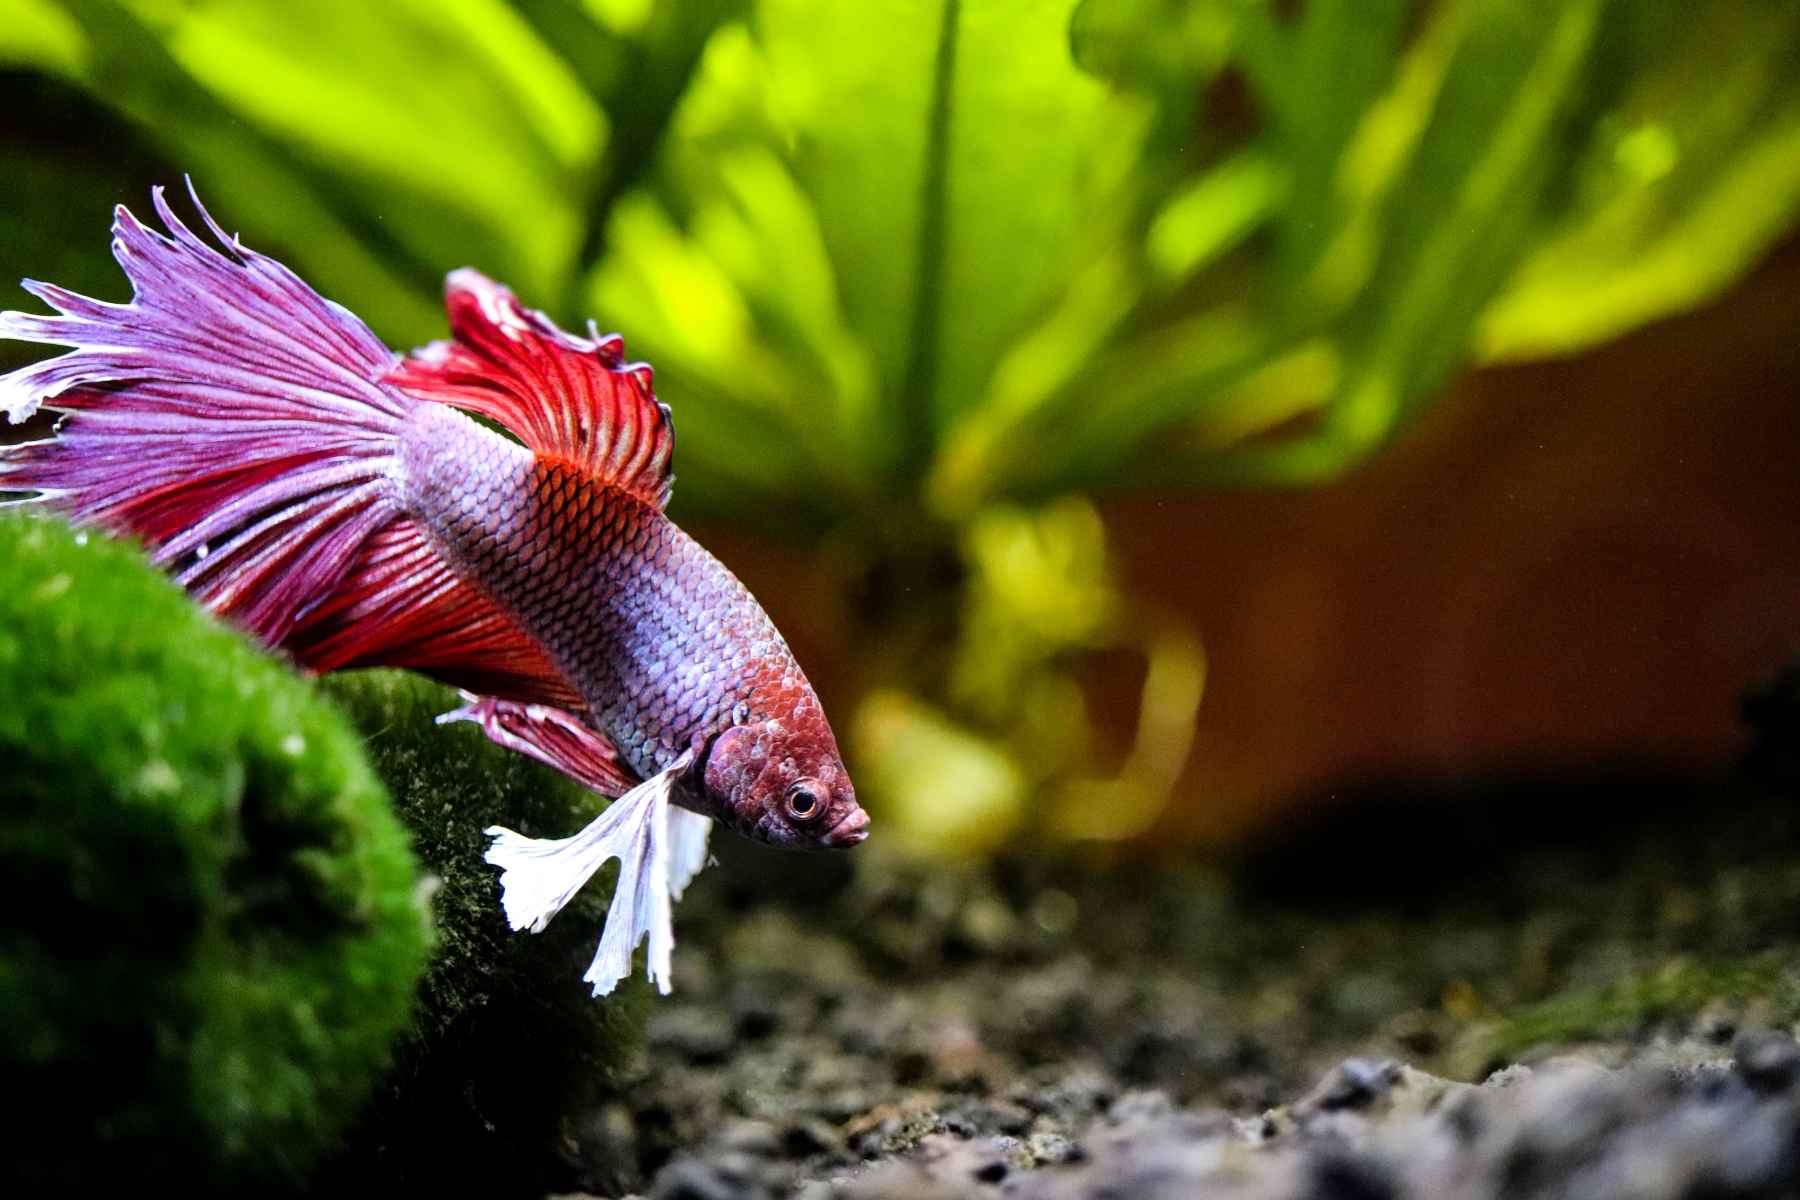 red and white long tailed betta fish in tank